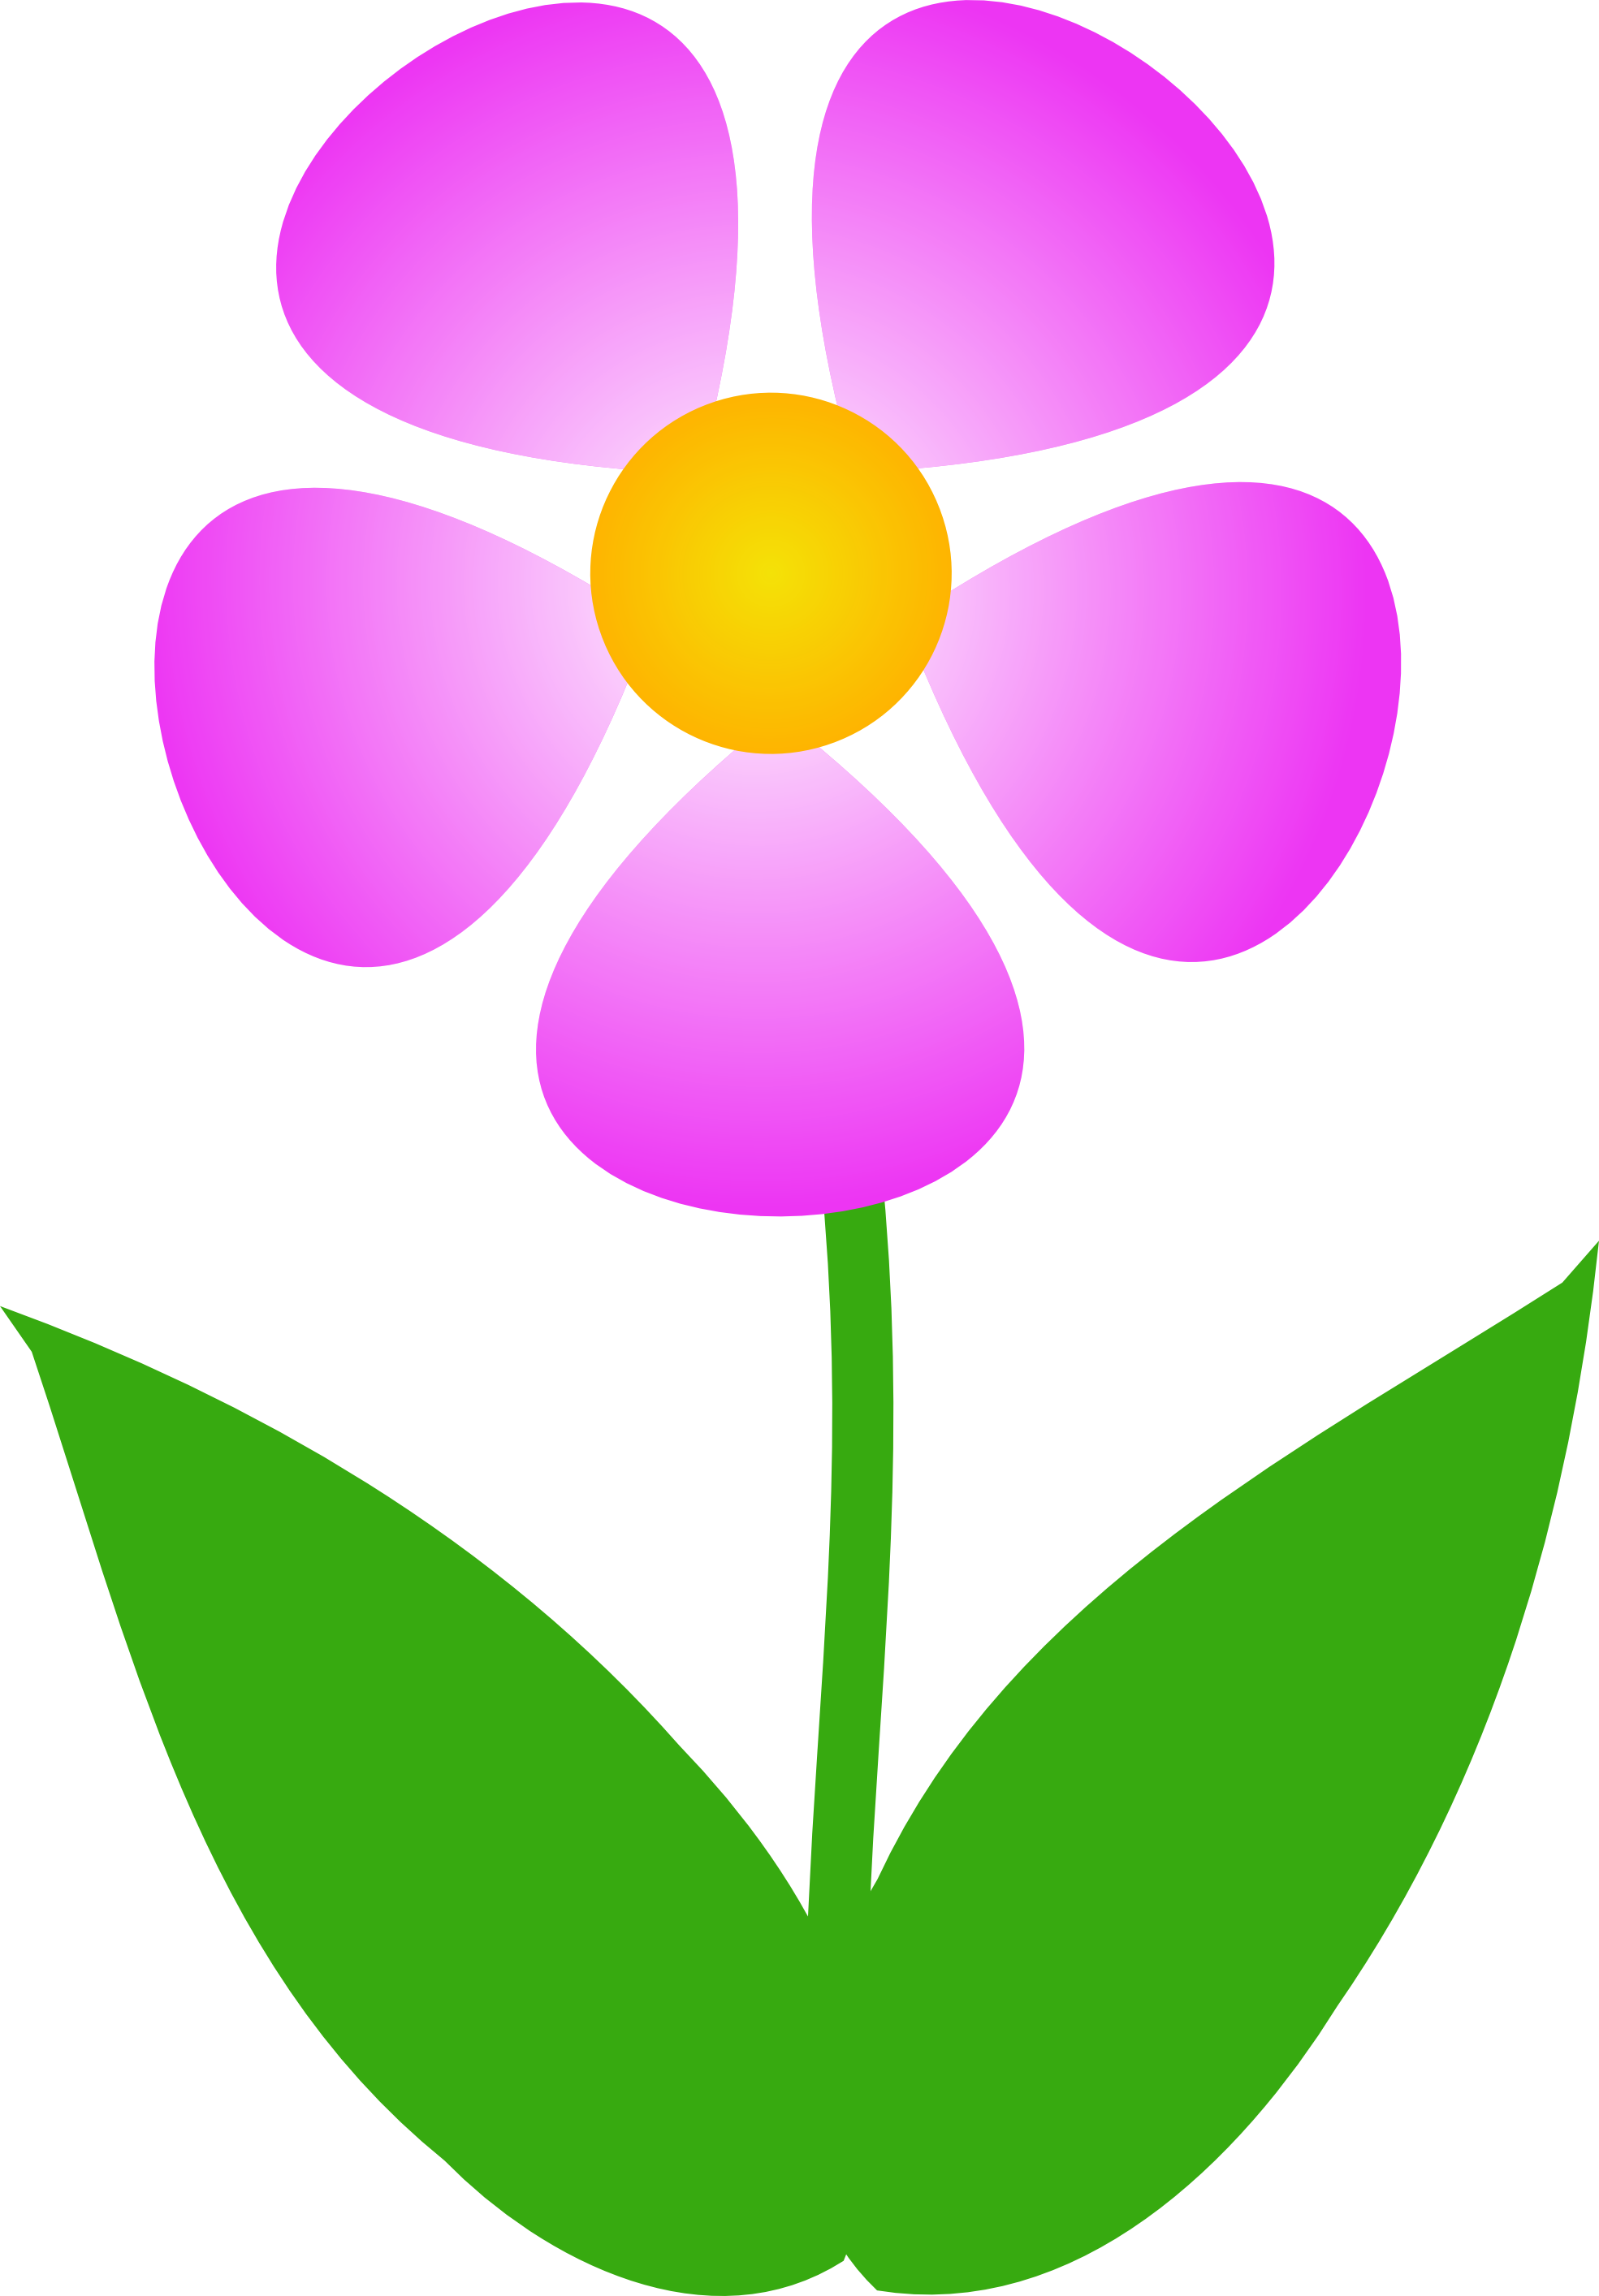 spring flower clip art images - all the Gallery you need!